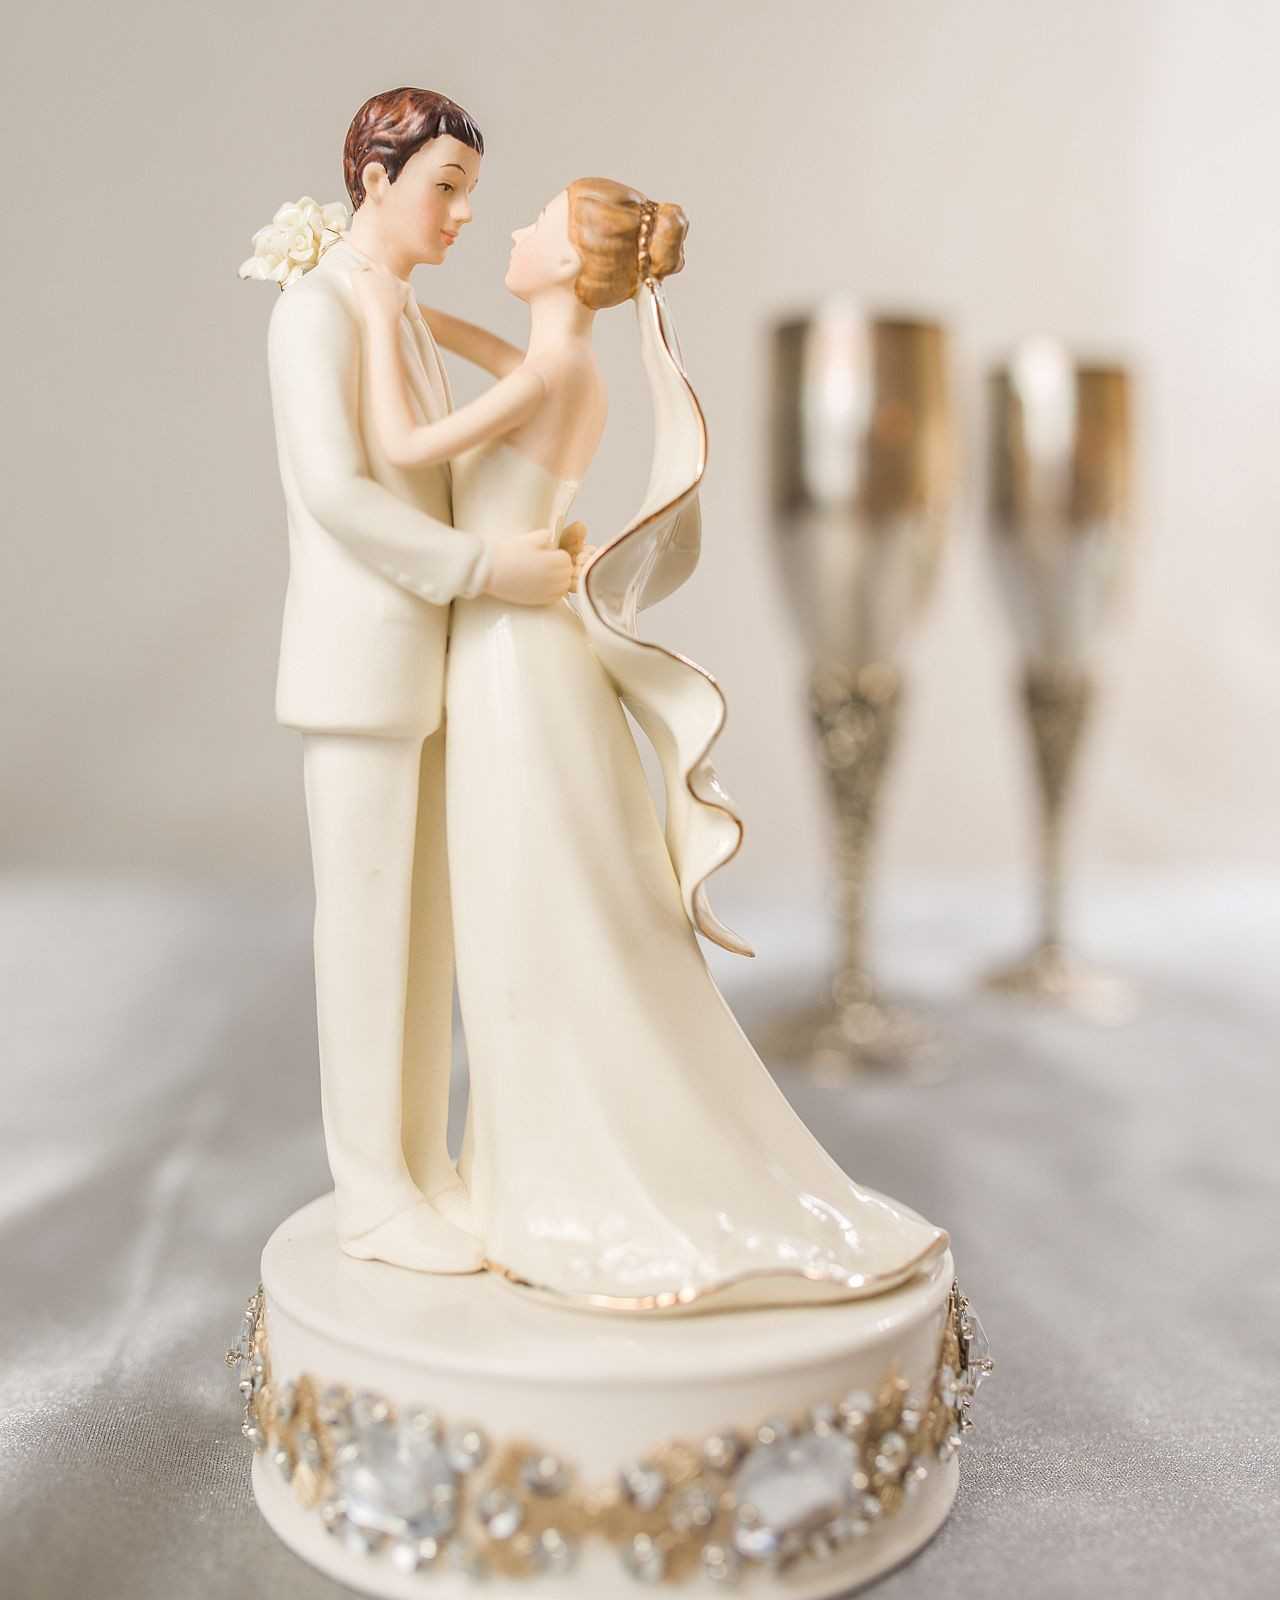 Wedding Cakes Bride And Groom
 Glam f White Porcelain Bride and Groom Wedding Cake